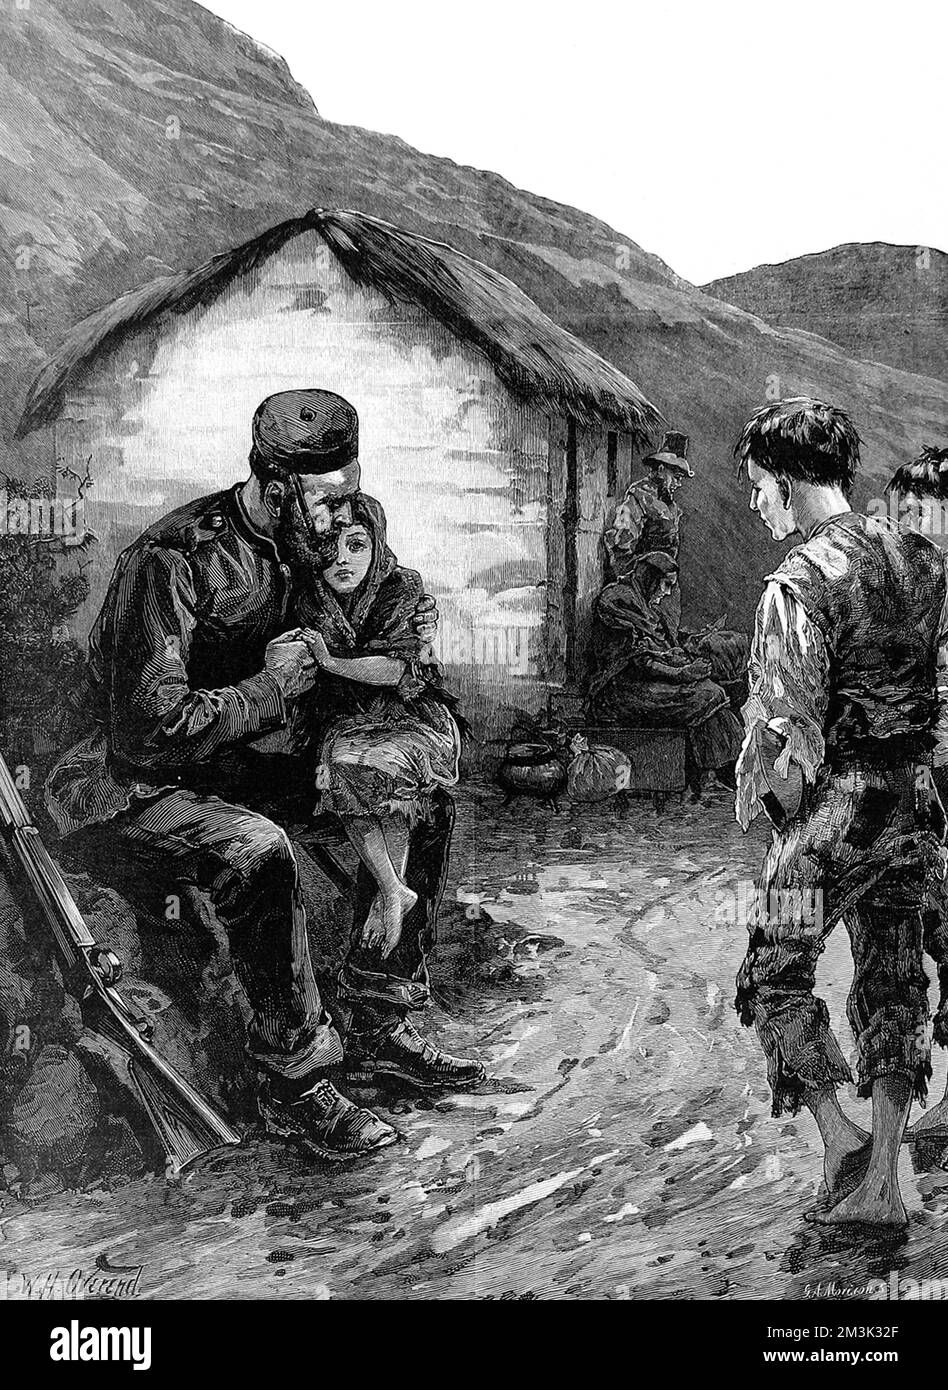 A figure of authority moved to pity, comforts a young barefoot girl at the scene of an eviction on Clare Island, Ireland. Two young lads, also barefoot and in rags, look on as the soldier tenderly holds her hand and sits her on his lap. In the background a dejected man and woman hang their heads. Their destitution and poverty illustrated by the meagre possessions at the woman's side. These miserable conditions were brought on by the potato famine in the mid 19th century and further compounded by the forced evictions of poverty-stricken peasants from their homes and farms.     Date:  1886 Stock Photo